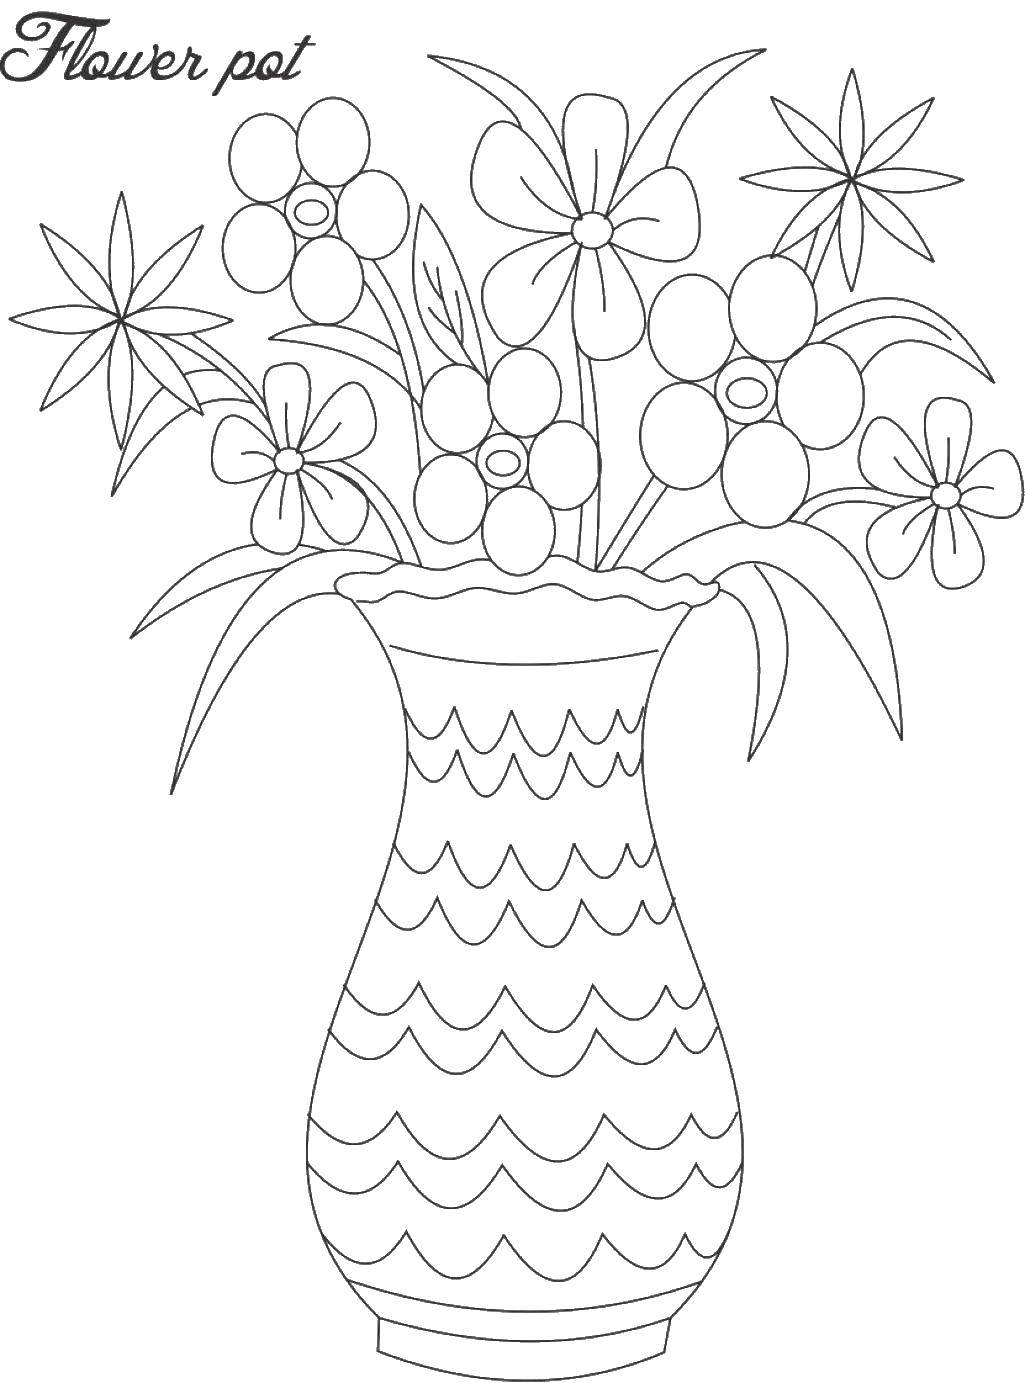 Coloring Vase with patterns and colors. Category Vase. Tags:  vase, flowers, patterns.